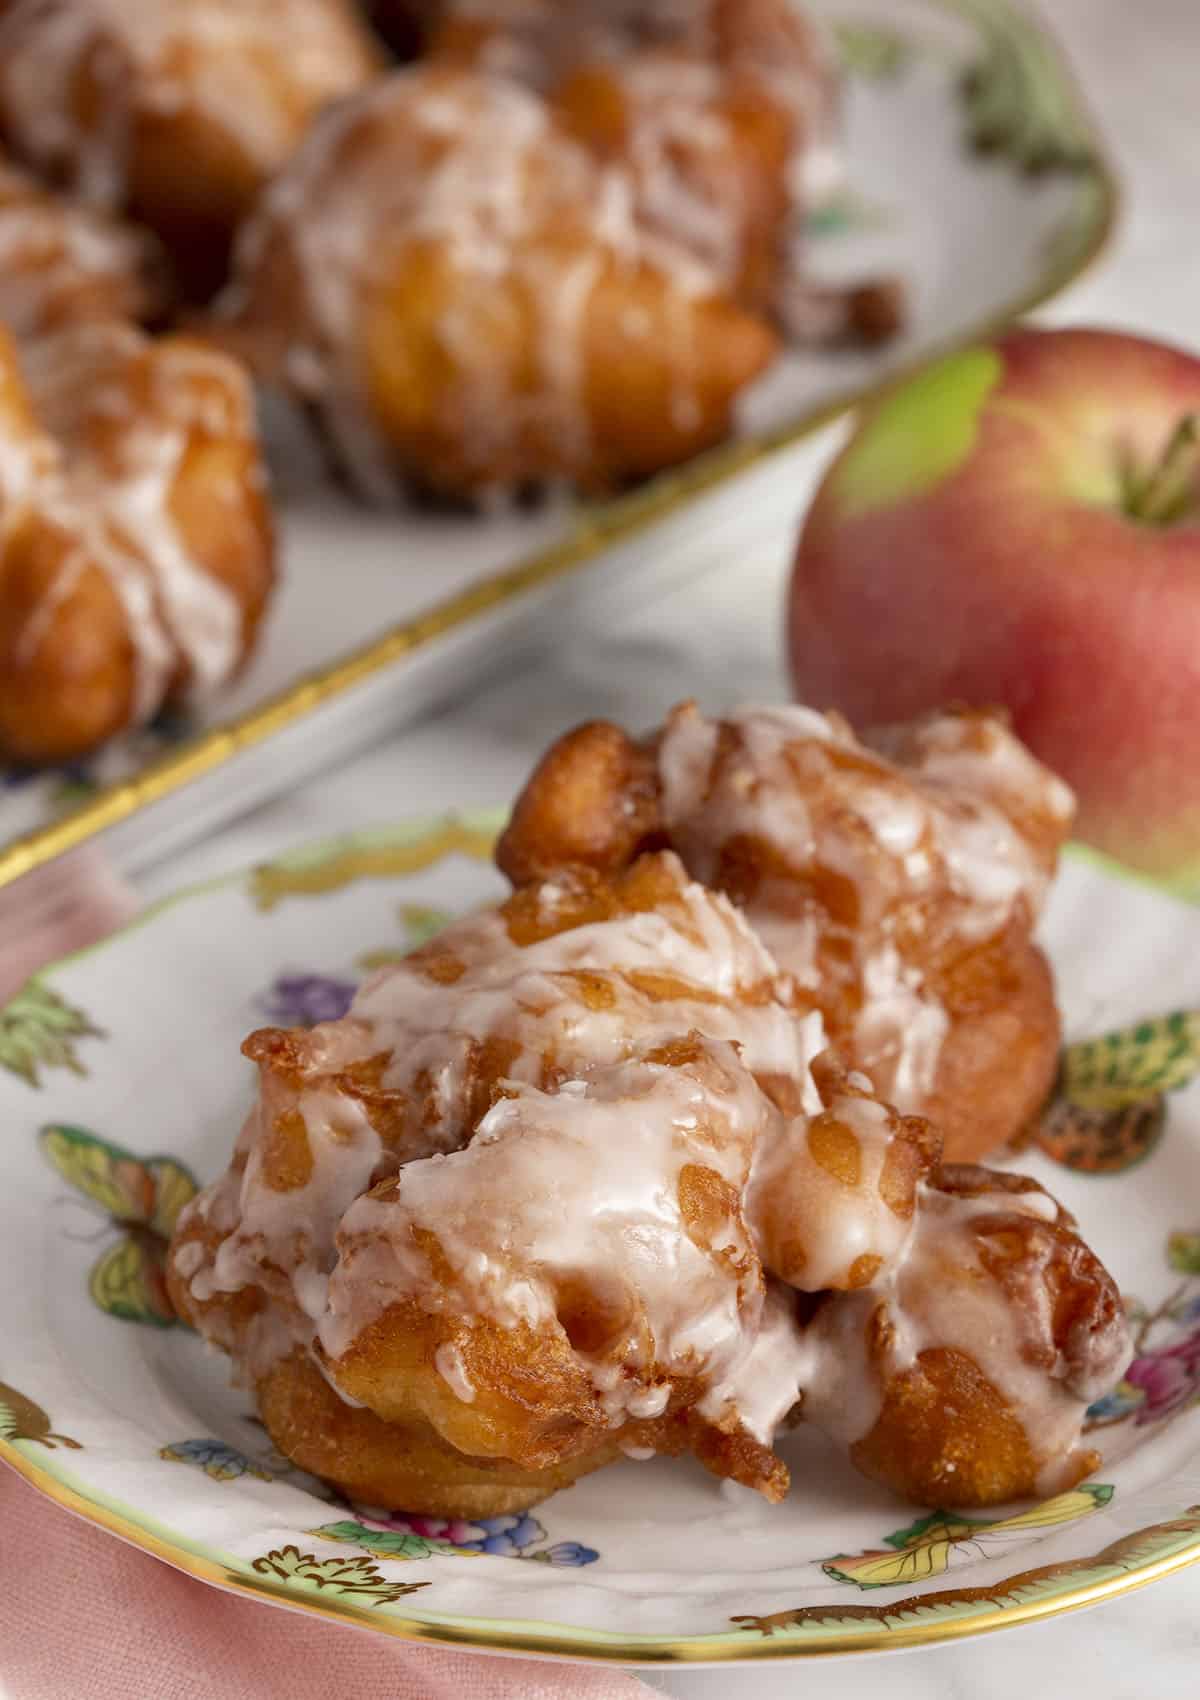 Apple fritters on a plate.